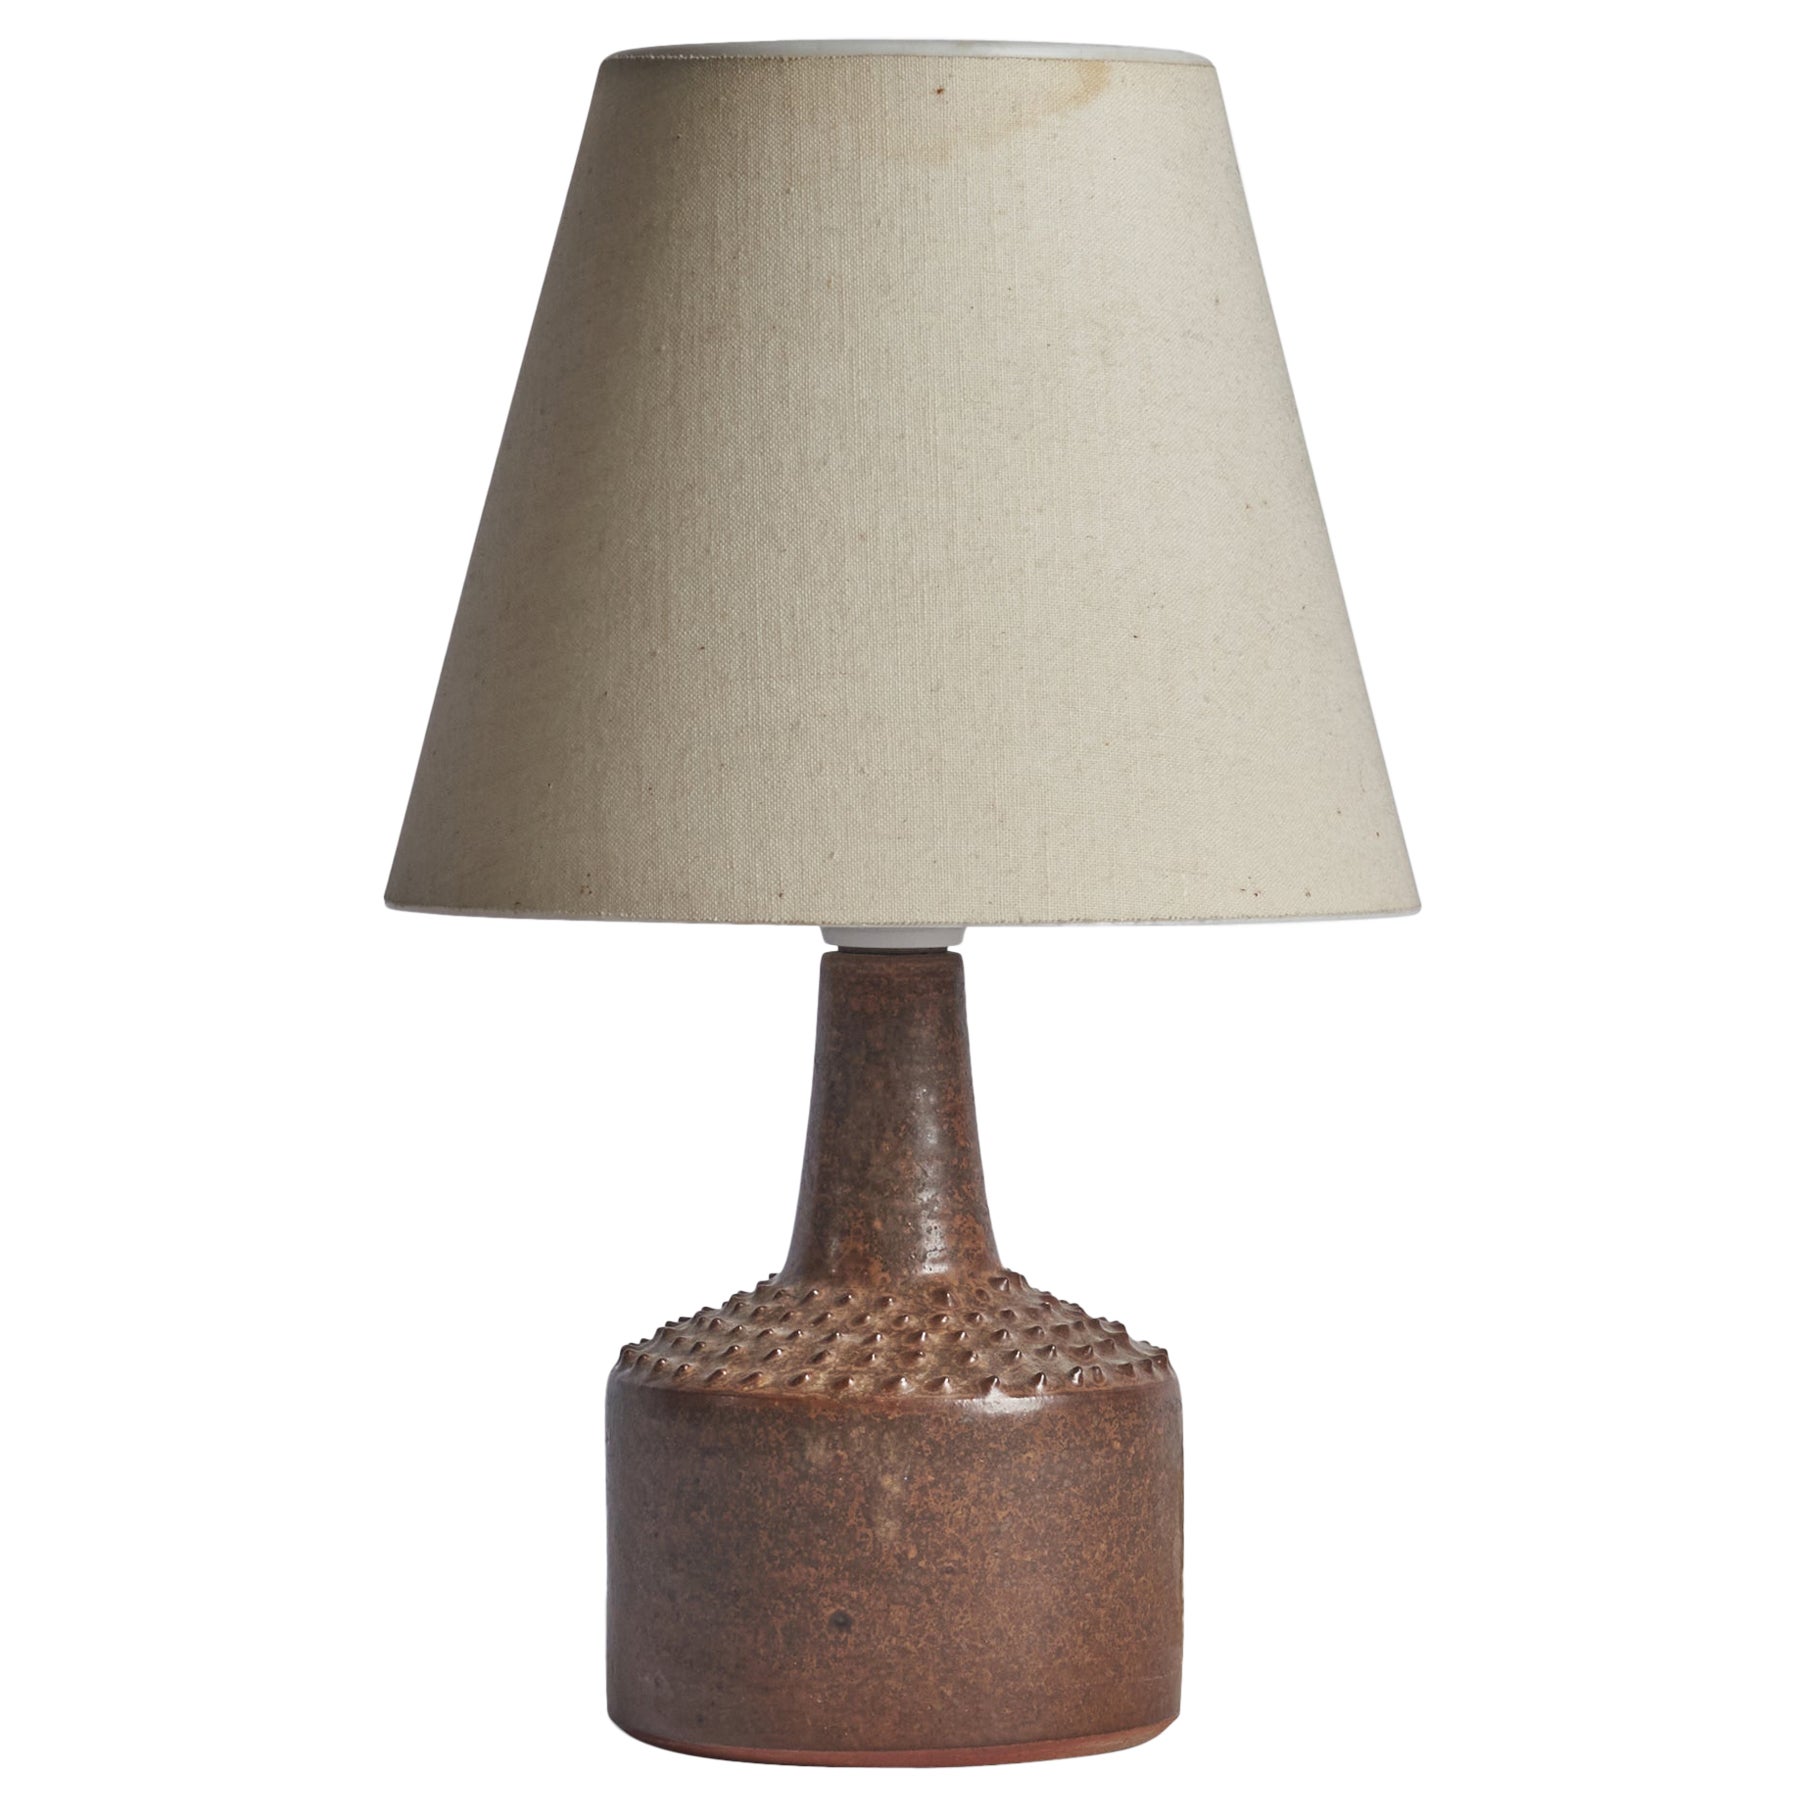 Rolf Palm, Small Table Lamp, Stoneware, Sweden, 1960s